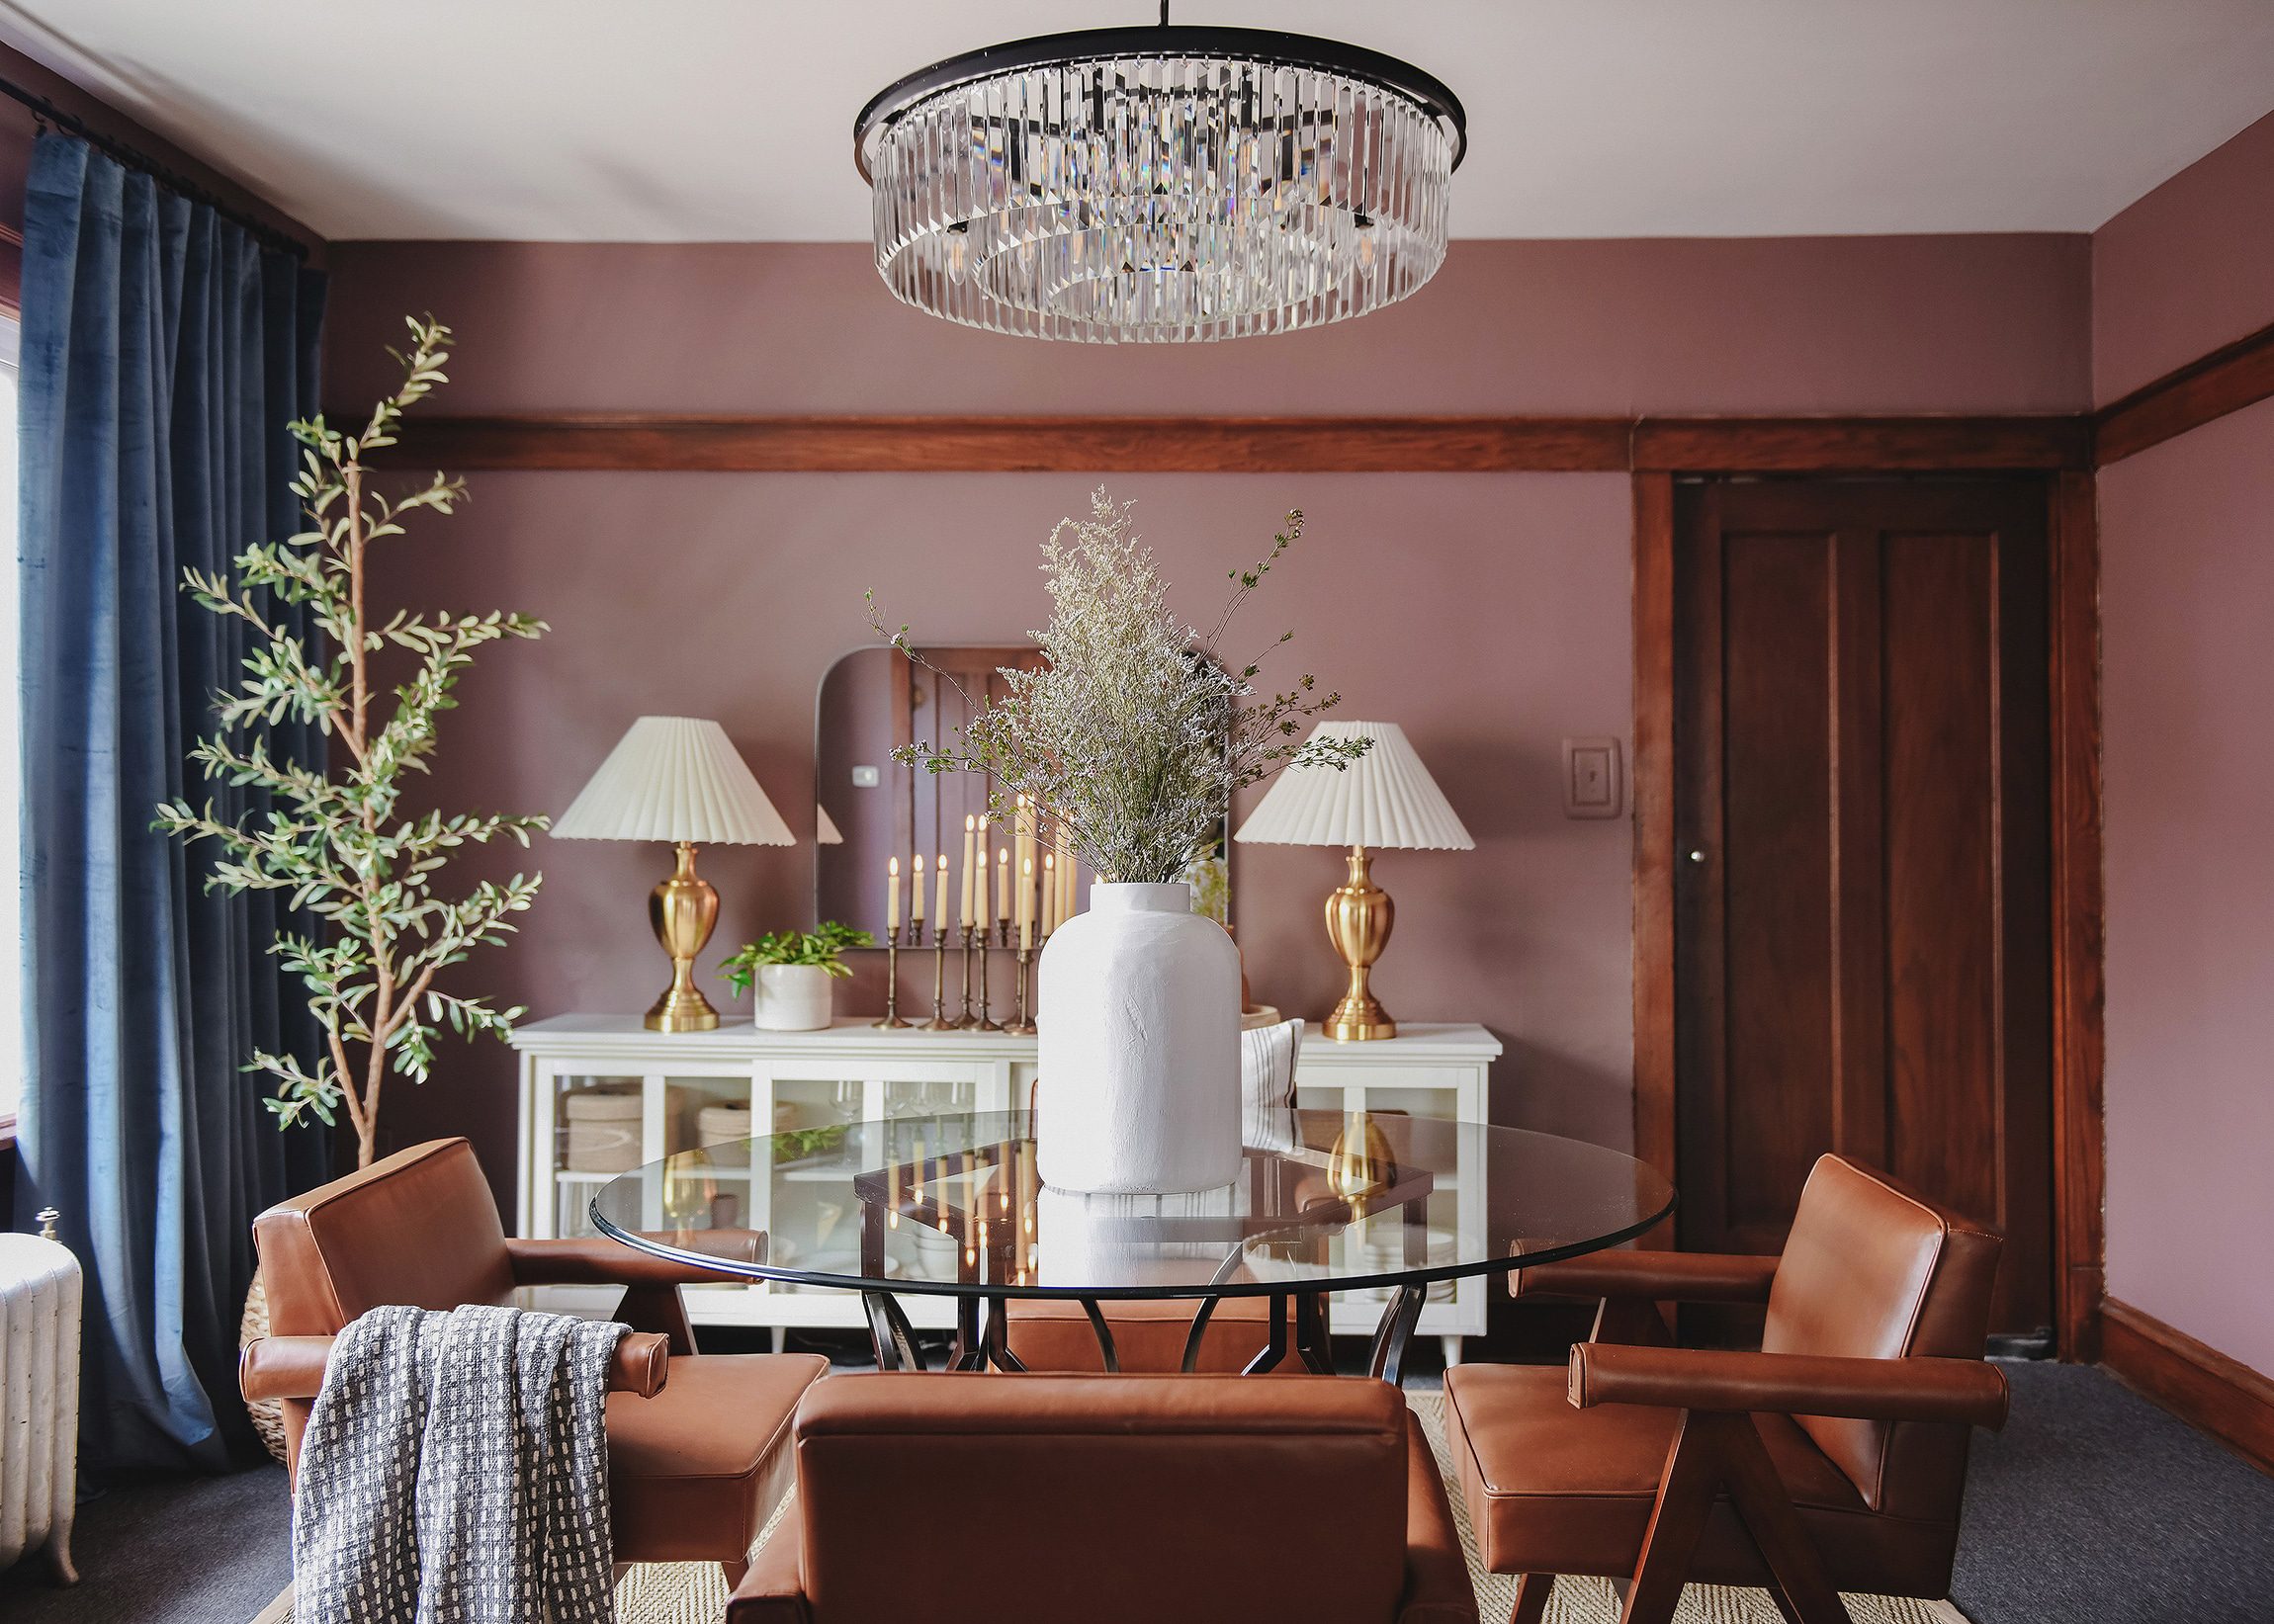 LaTanya's dining room on reveal day! // via yellow brick home.